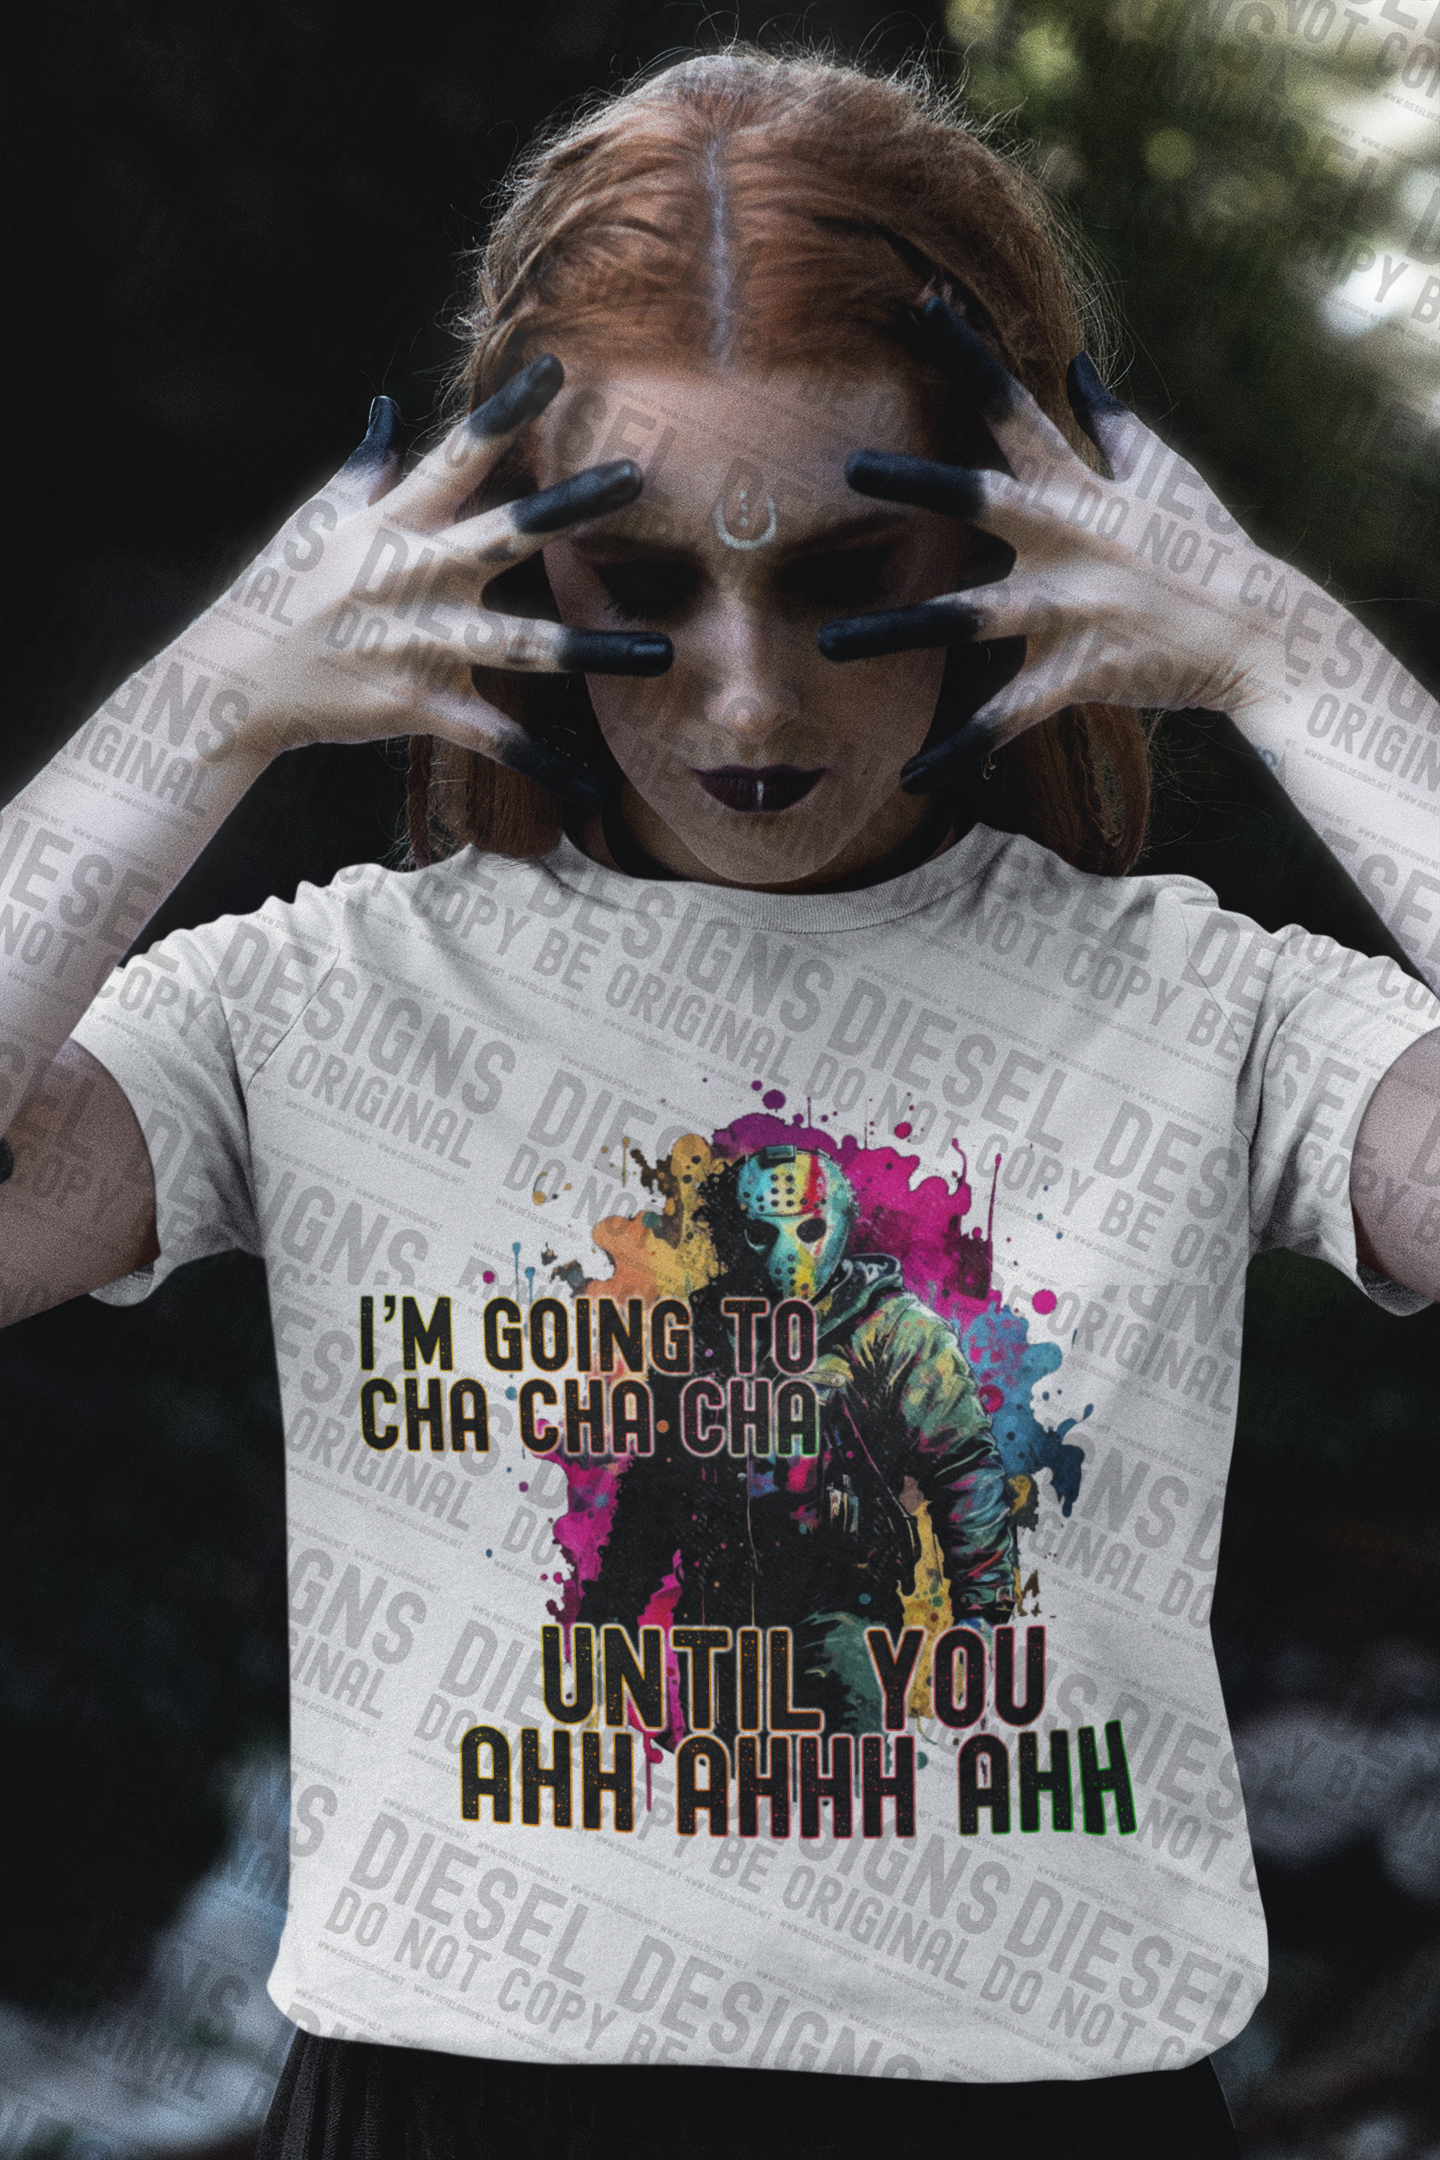 NSFW Horror Collab with Early Bird Design Co. | 300 DPI | PNG | Seamless | Tumbler Wraps | Collab |